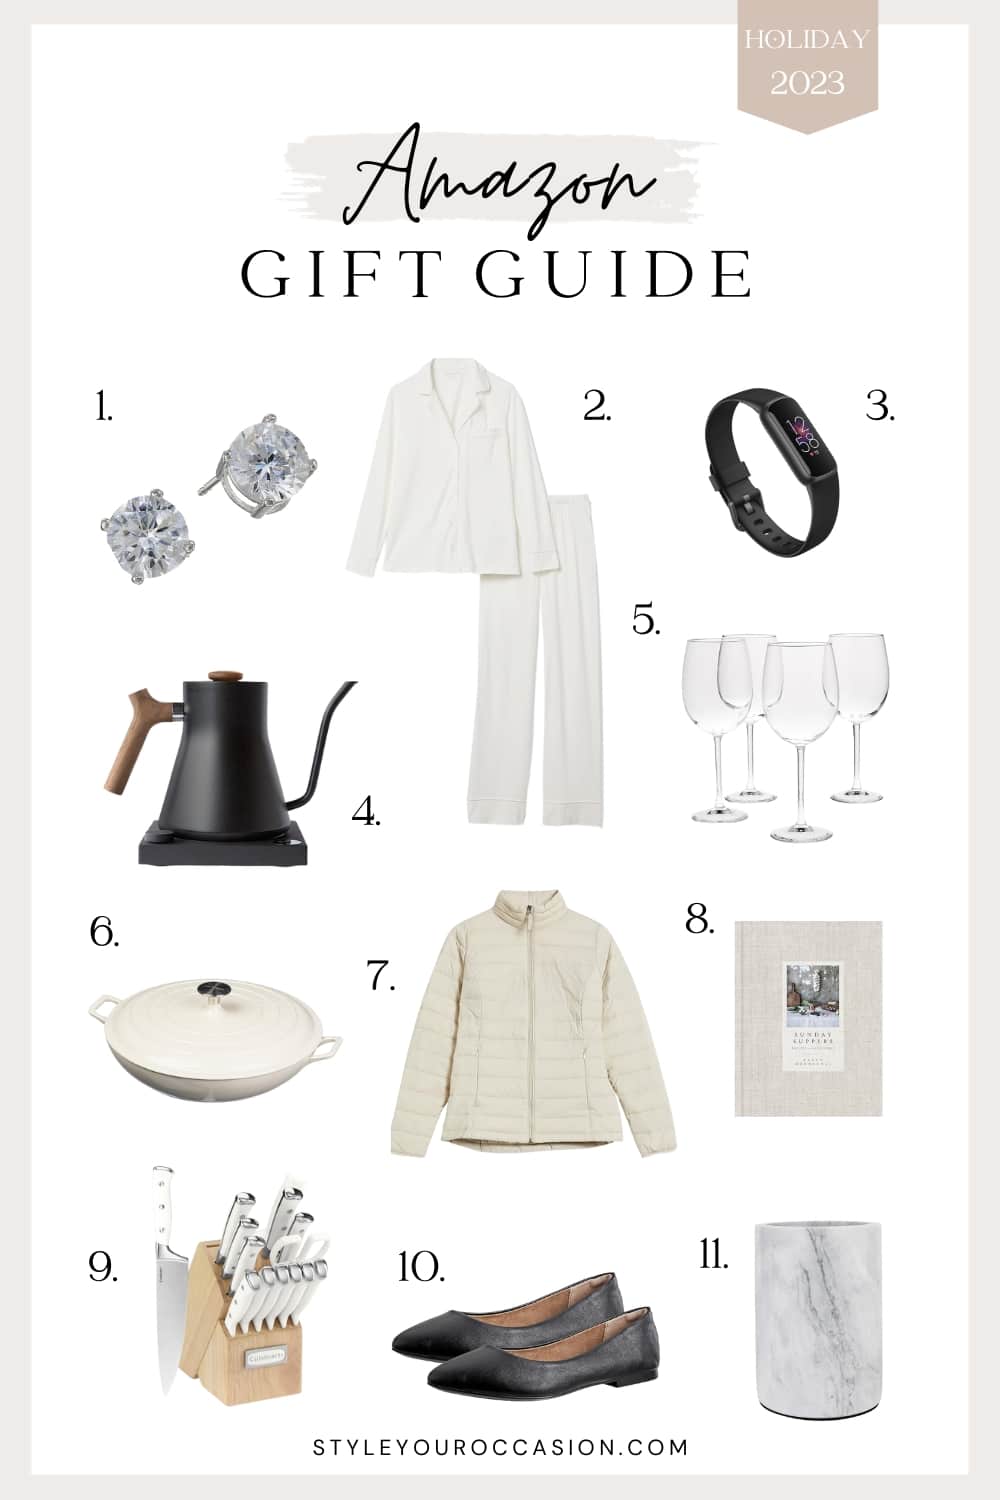 An image board with holiday gift ideas from Amazon, including jewelry, a tea kettle, pajamas, glassware, and more